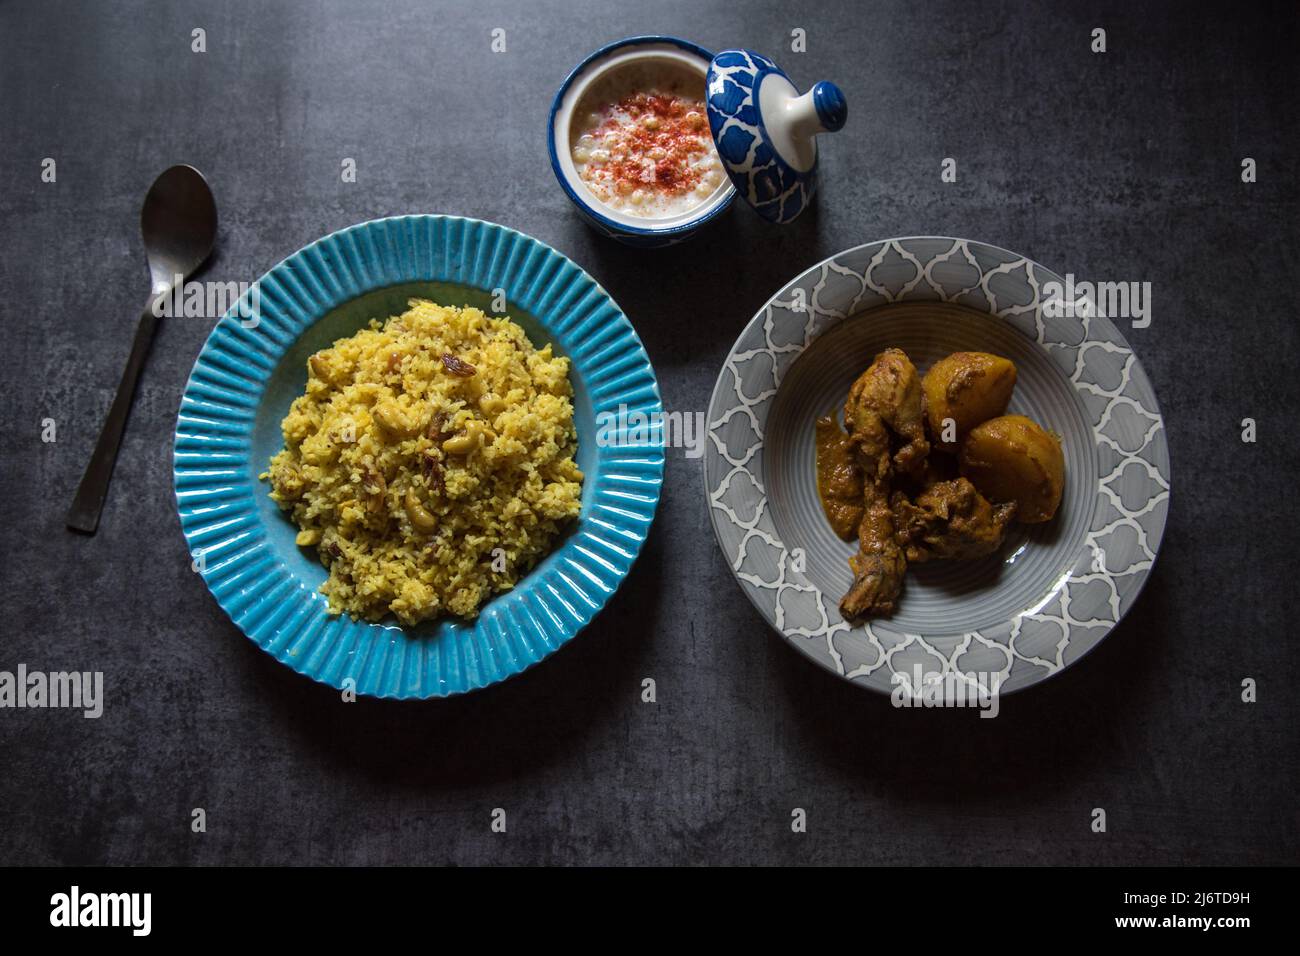 Indian meal pulao made of basmati rice and chicken curry served in bowl on a dark background. Top view, selective focus. Stock Photo